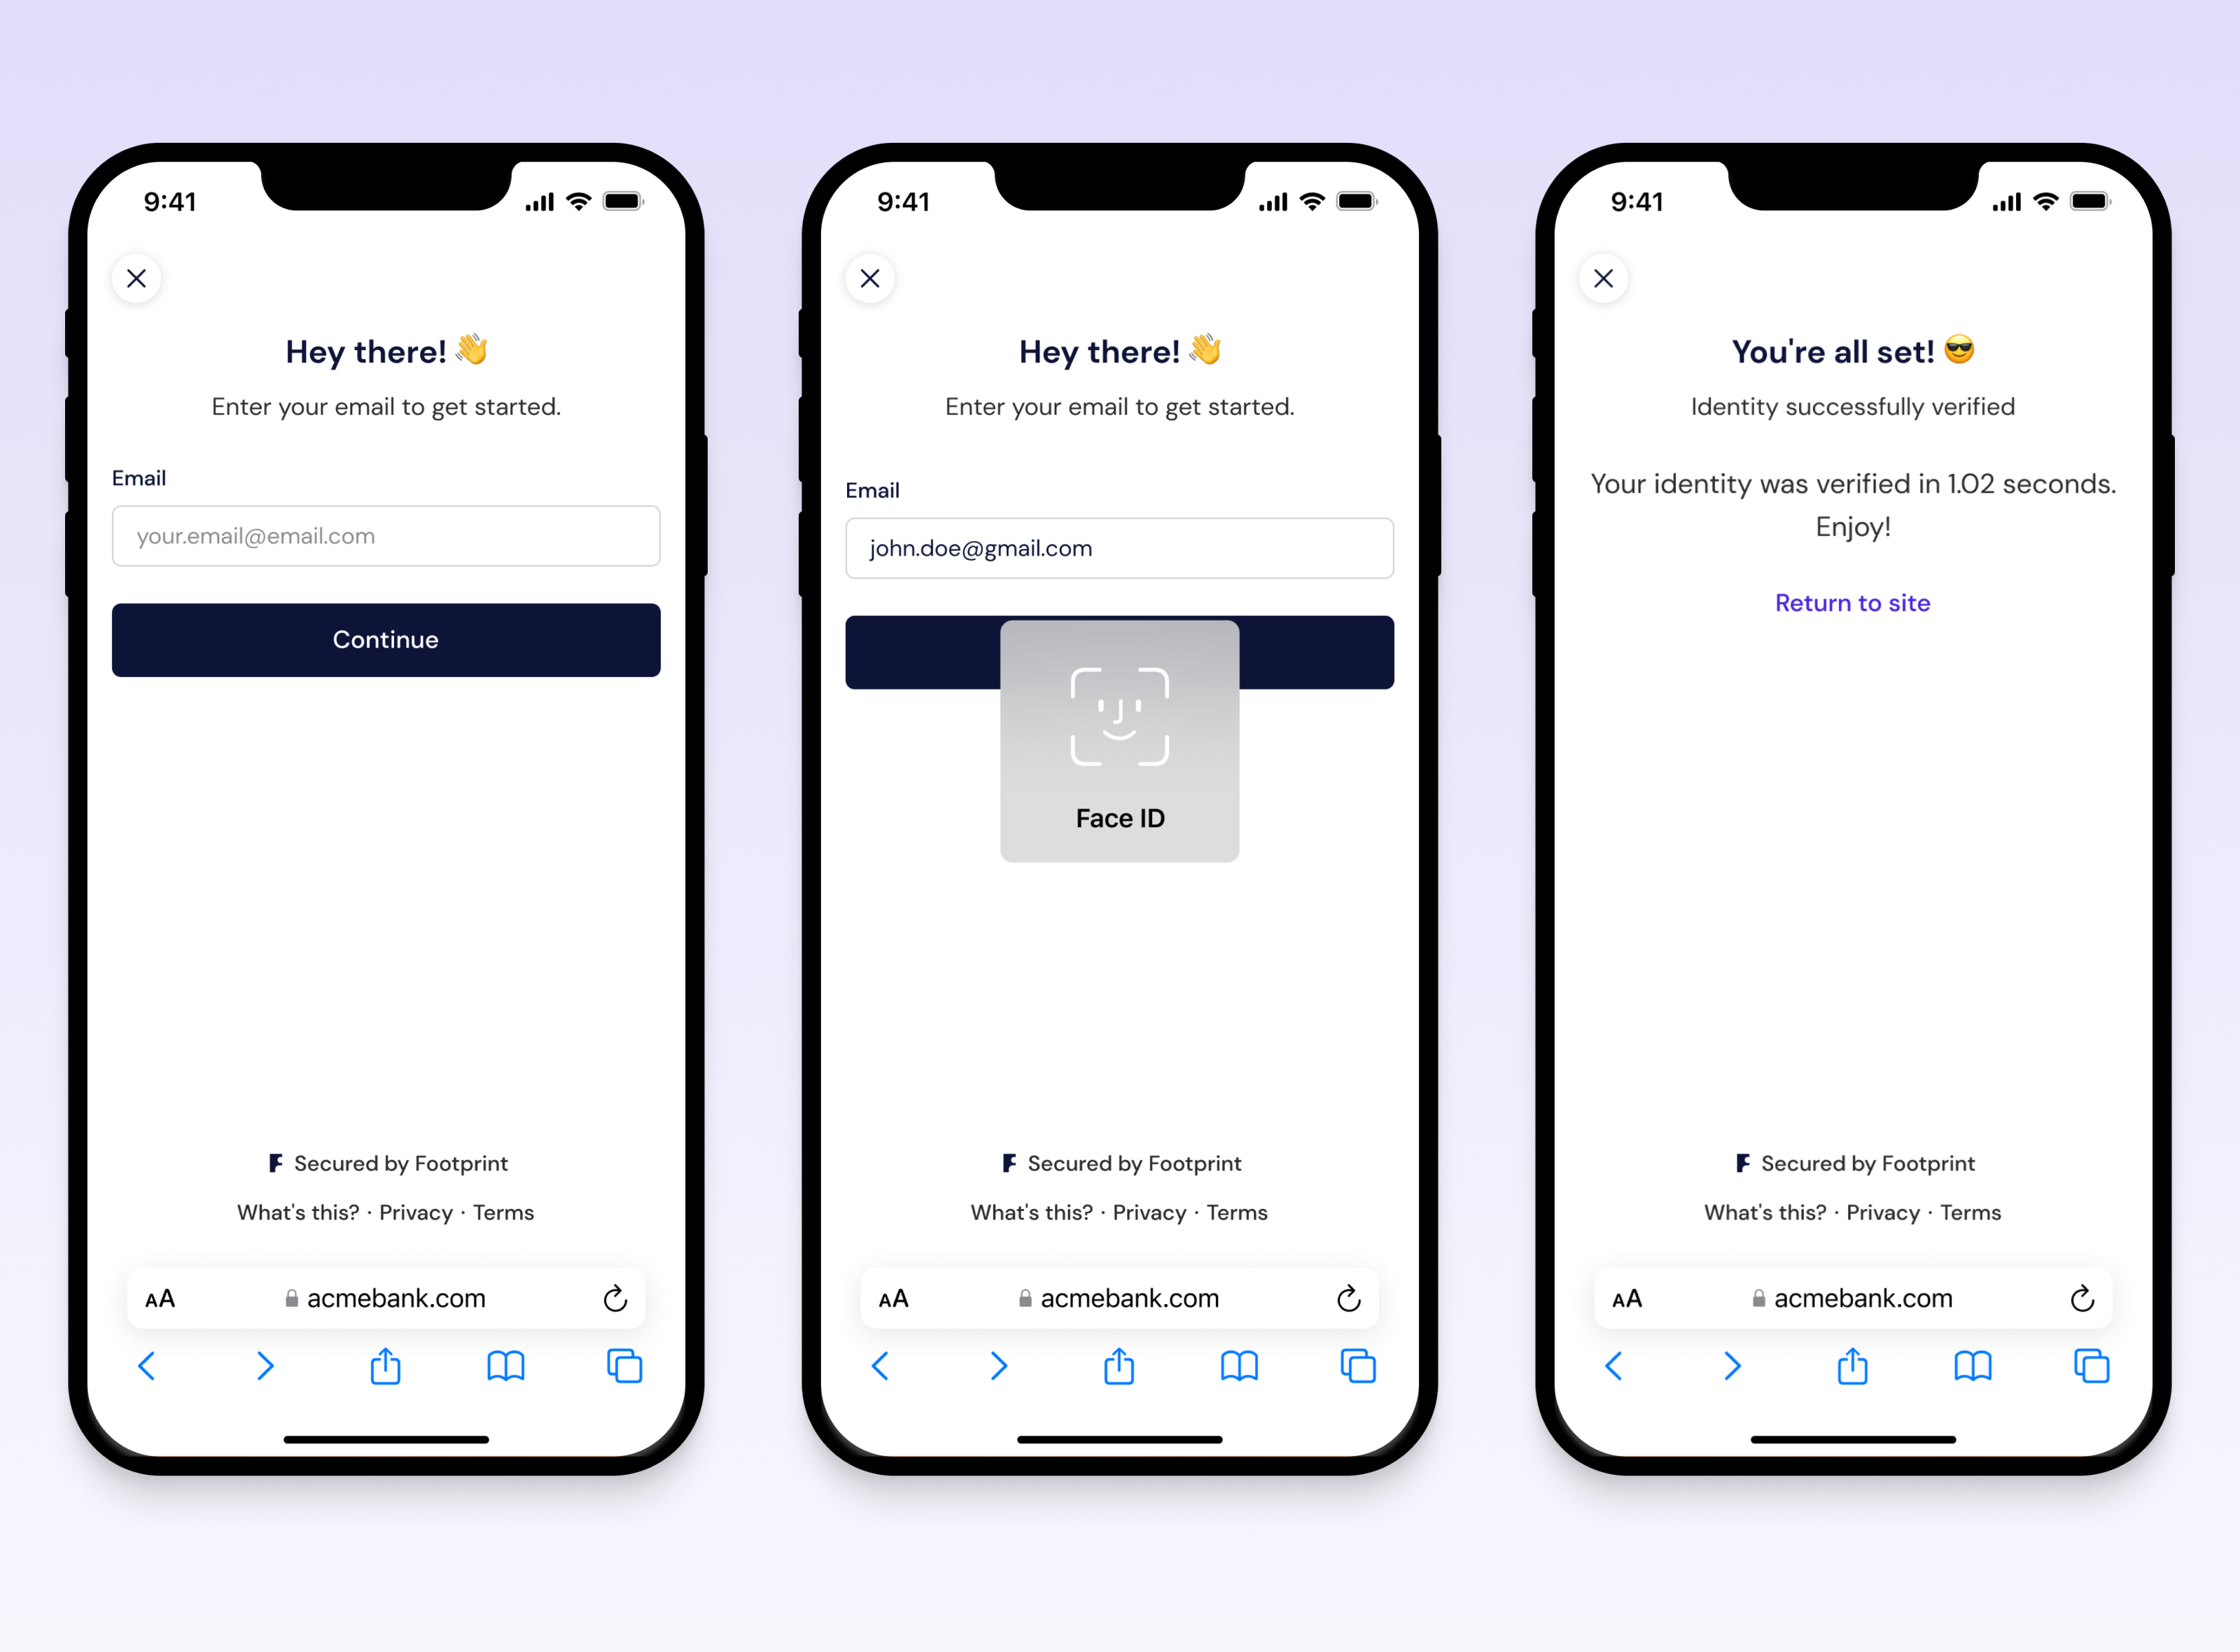 A fingerprint product that shows a user using FaceID to access an app.